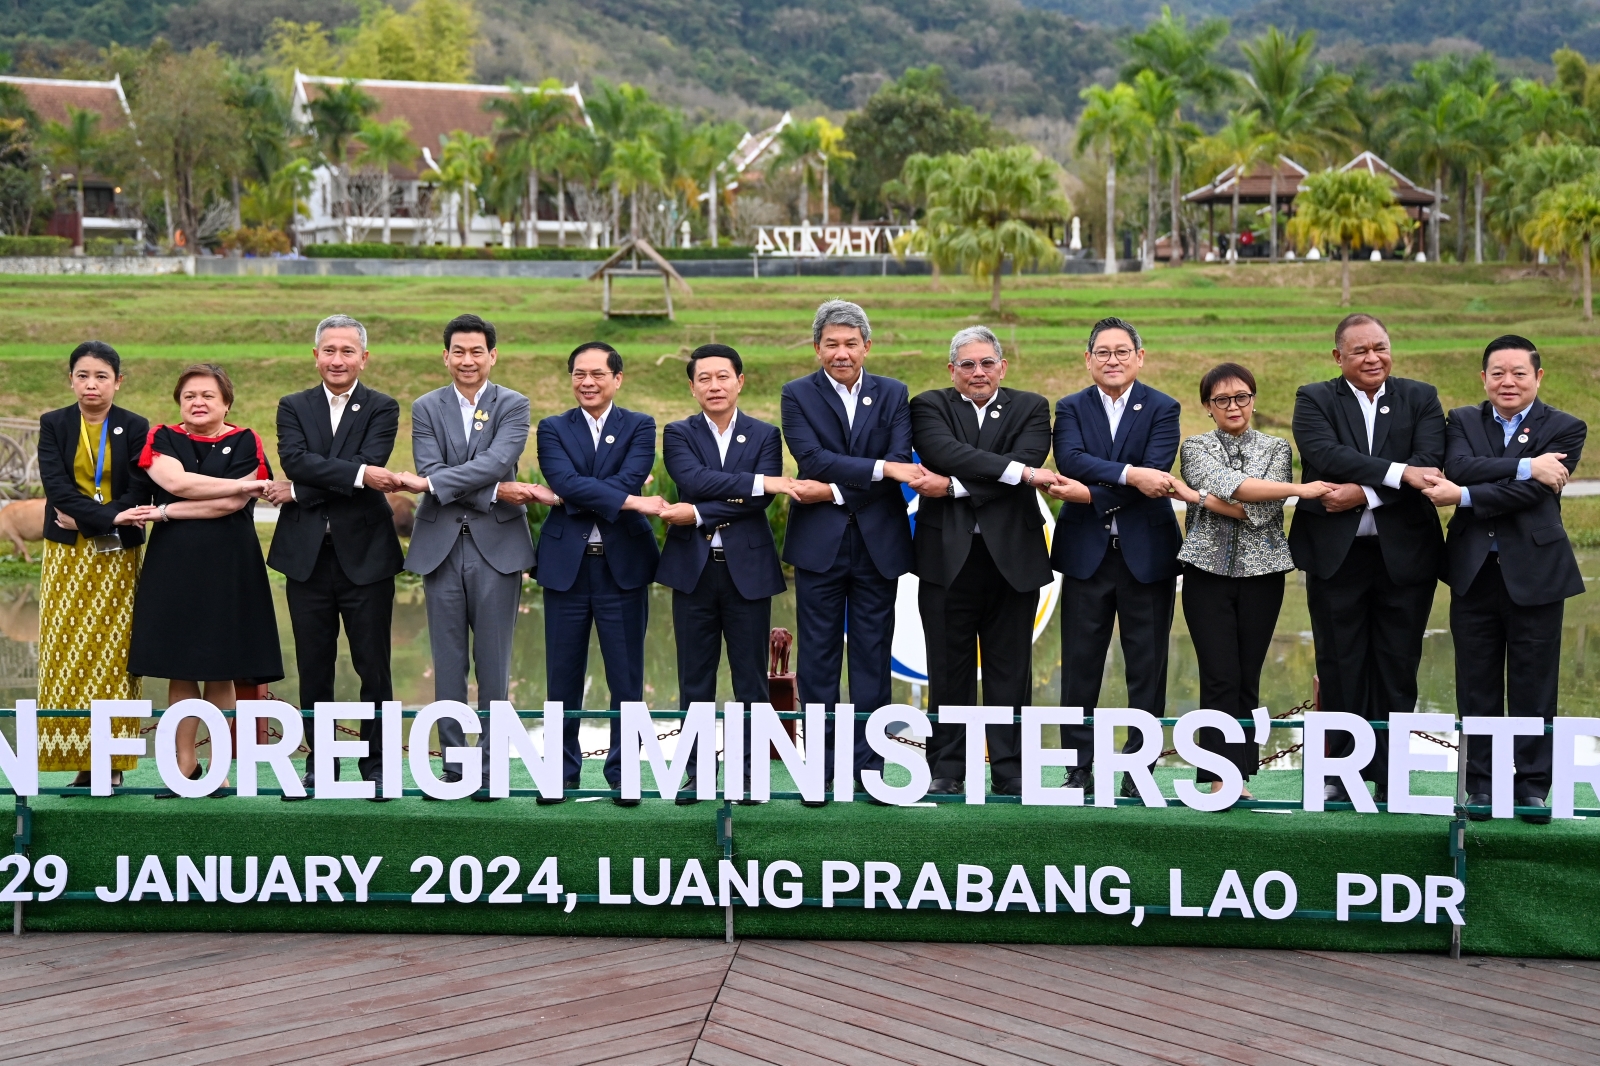 Group photo taken at the ASEAN foreign ministers' meeting in Luang Prabang on January 29, including the permanent secretary of Myanmar's foreign ministry Daw Marlar Than Htike on the far left. (AFP)